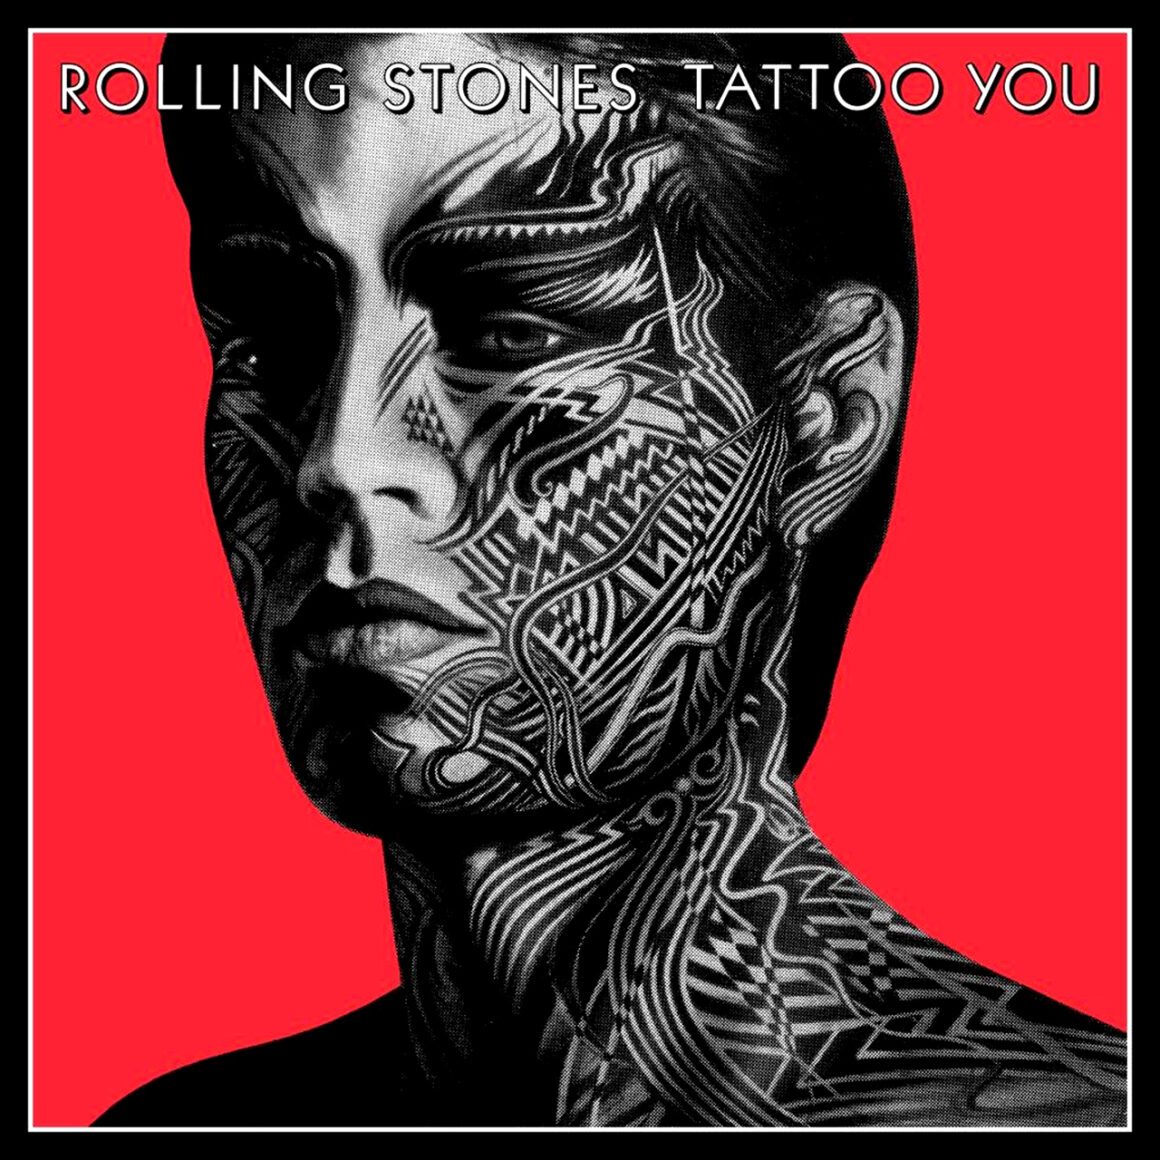 Rolling Stones, Tattoo You, 40th anniversary